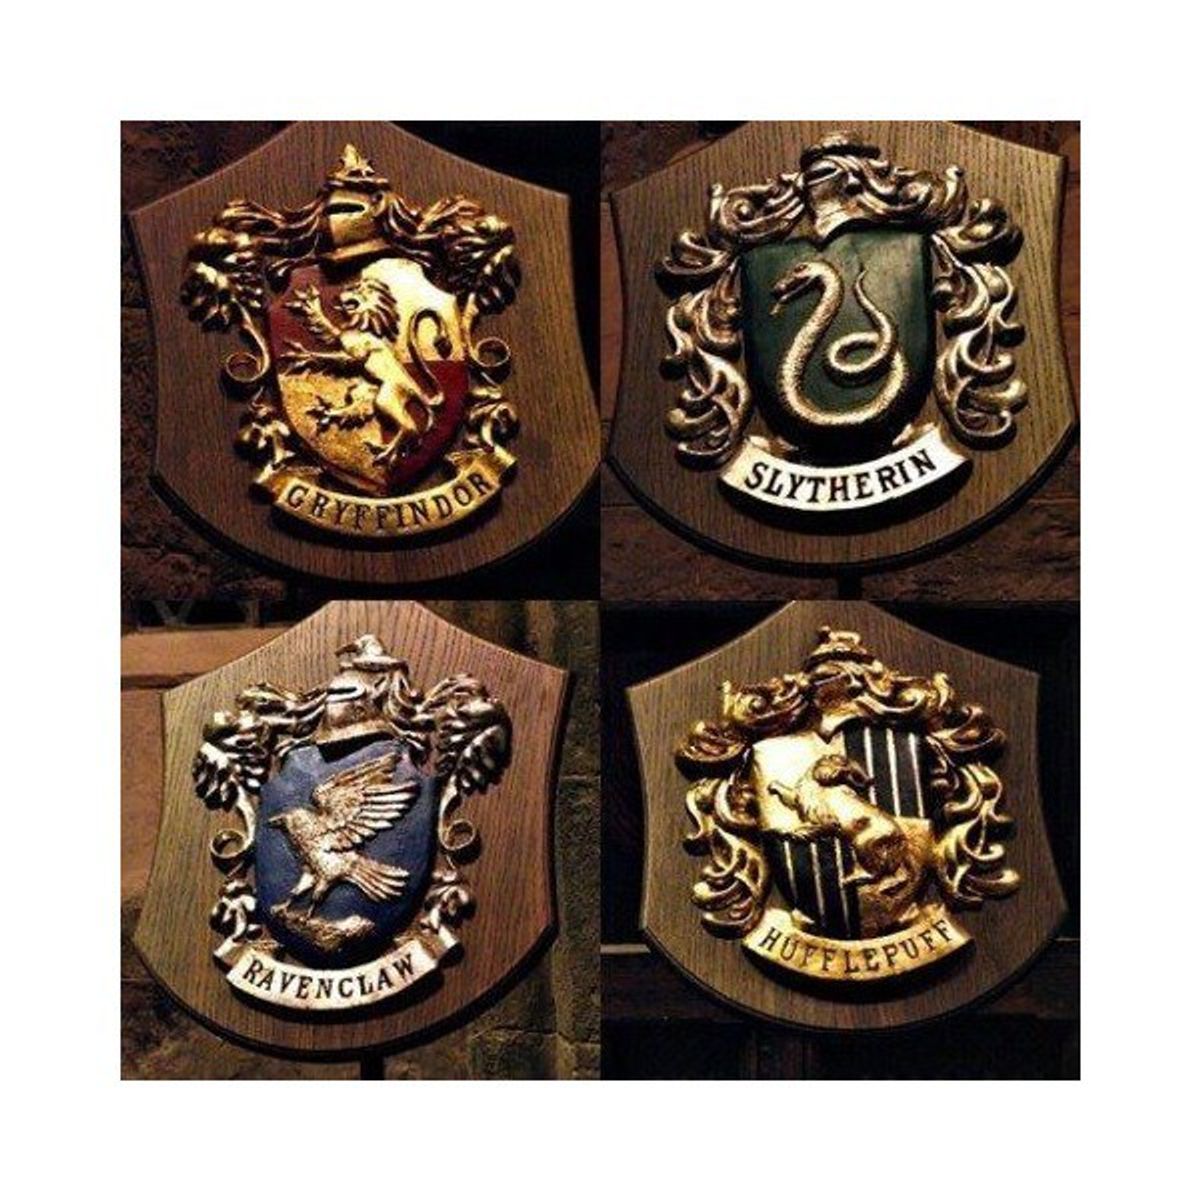 Hogwarts Houses Are So Much More Than Just Personality Sorters